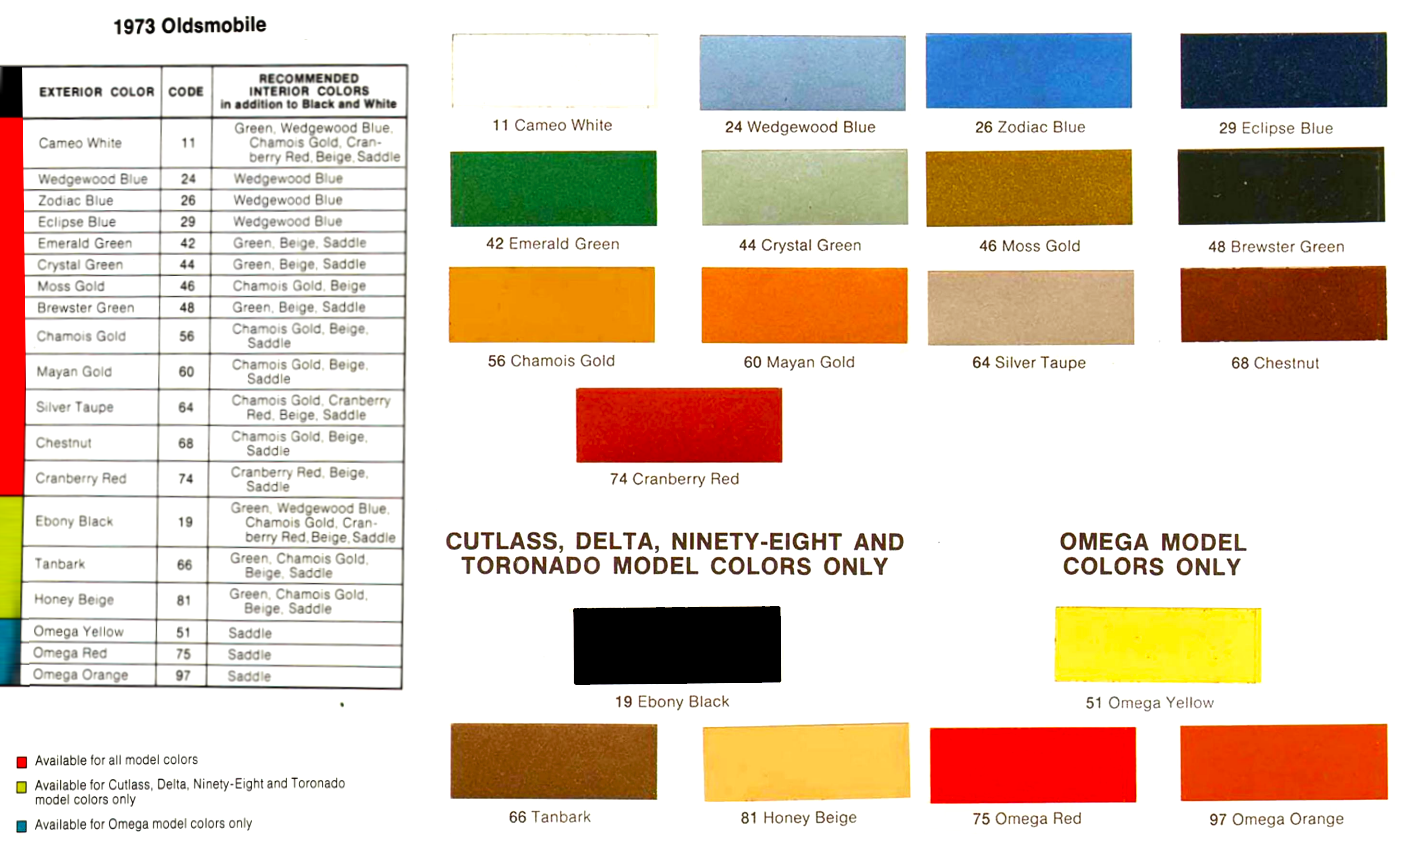 Colors and color names for 1973 oldsmobile vehicles